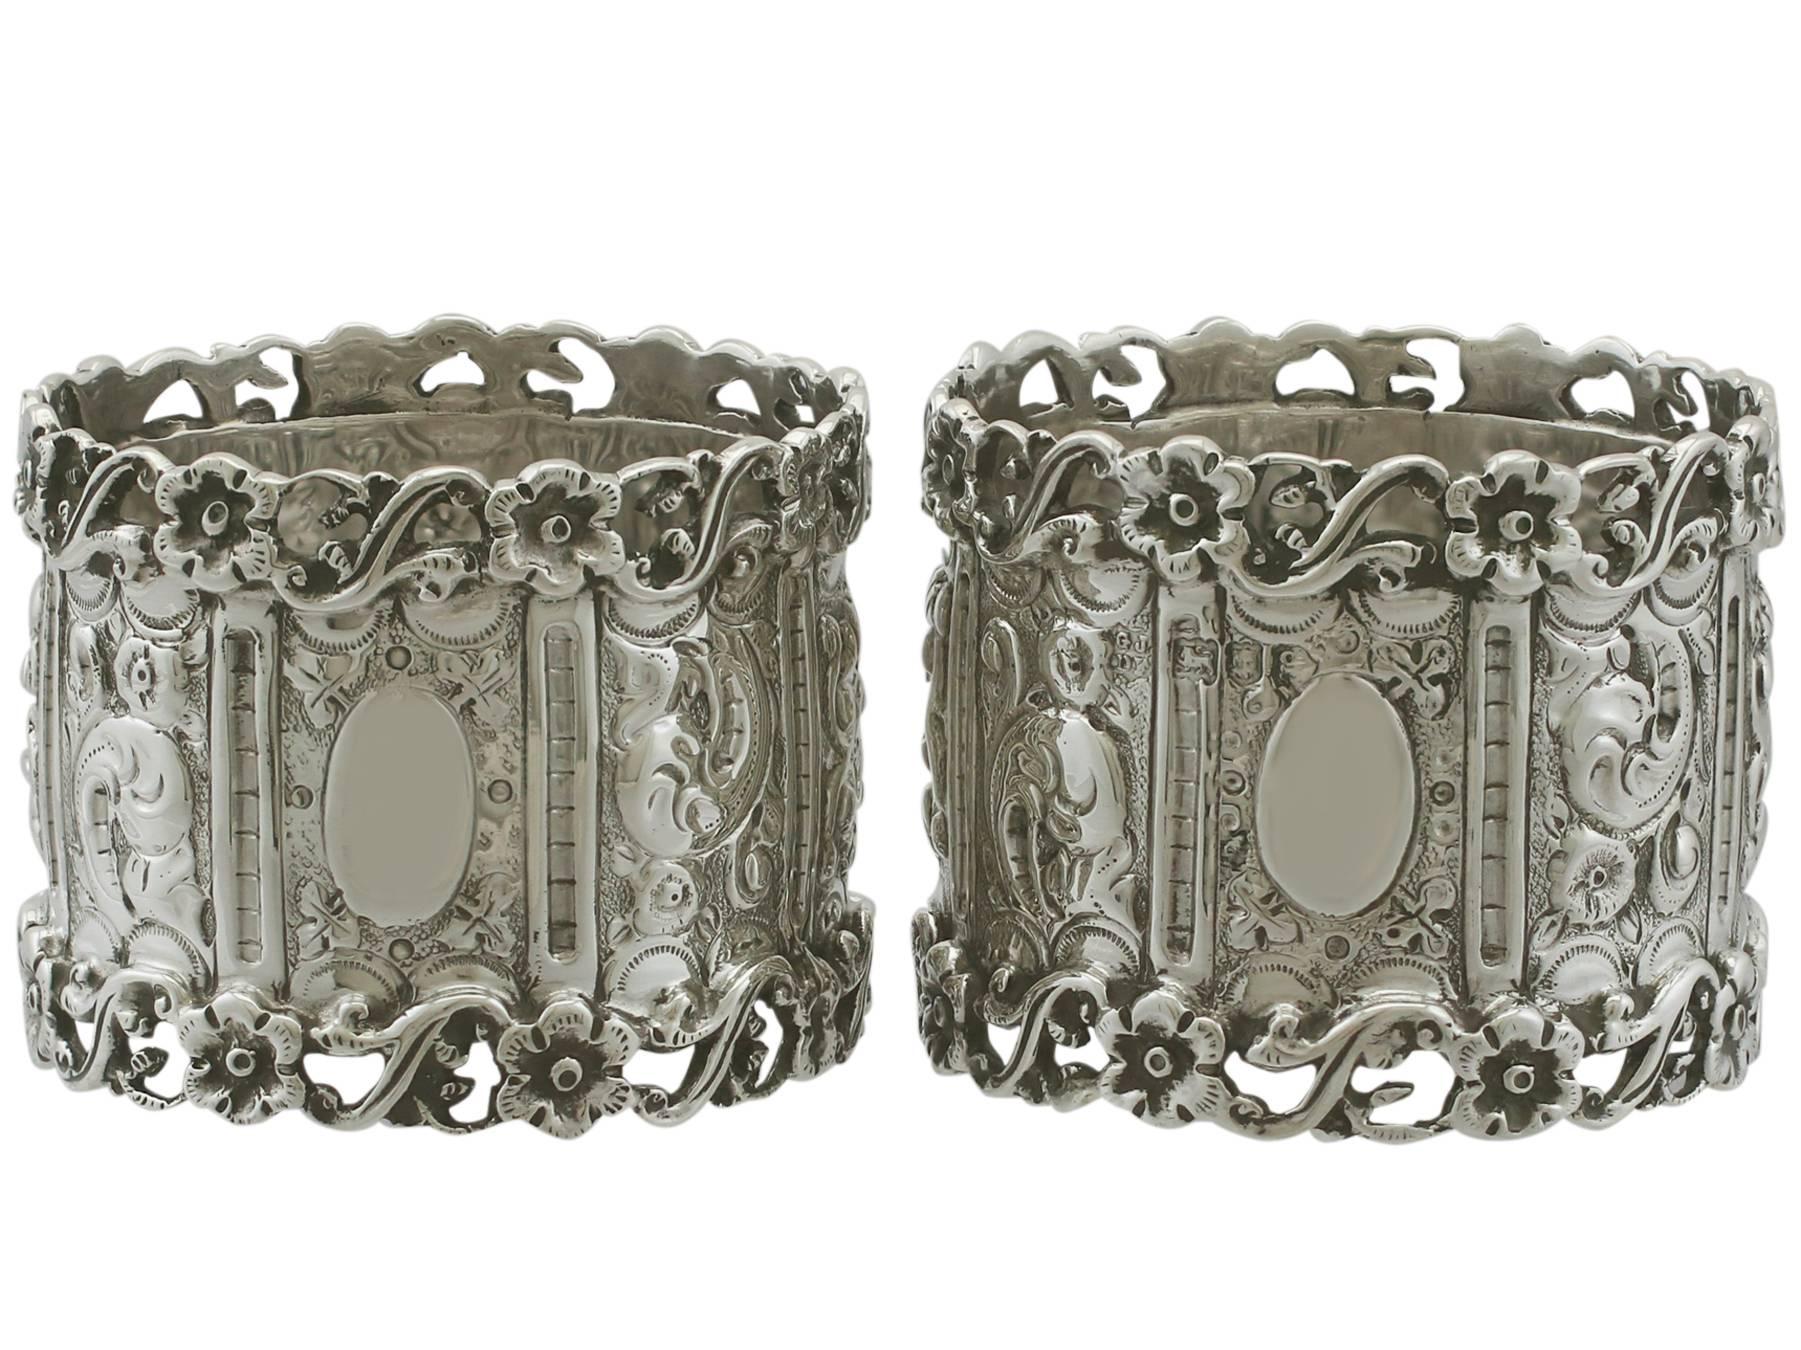 An exceptional, fine and impressive, large pair of antique Edwardian English sterling silver napkin rings; part of our dining silverware collection.

These exceptional antique Edwardian sterling silver napkin rings have a cylindrical shaped